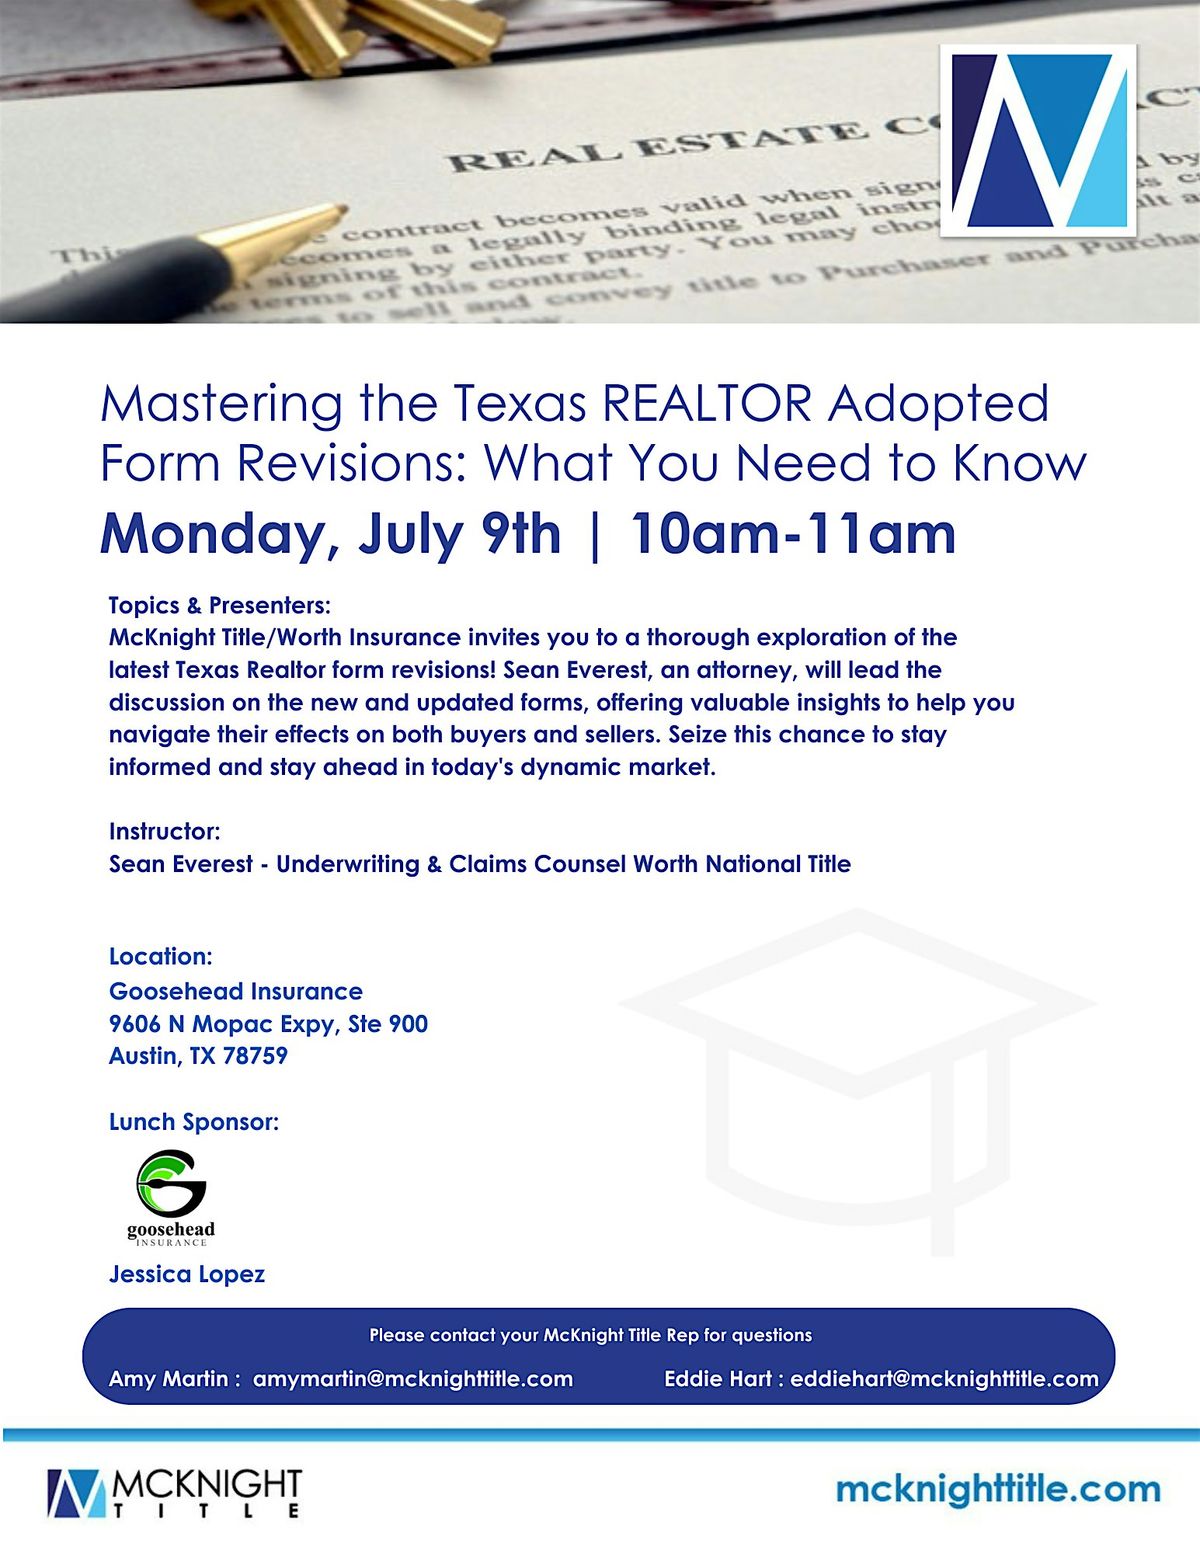 Mastering the Texas Realtor Adopted Form Revisions